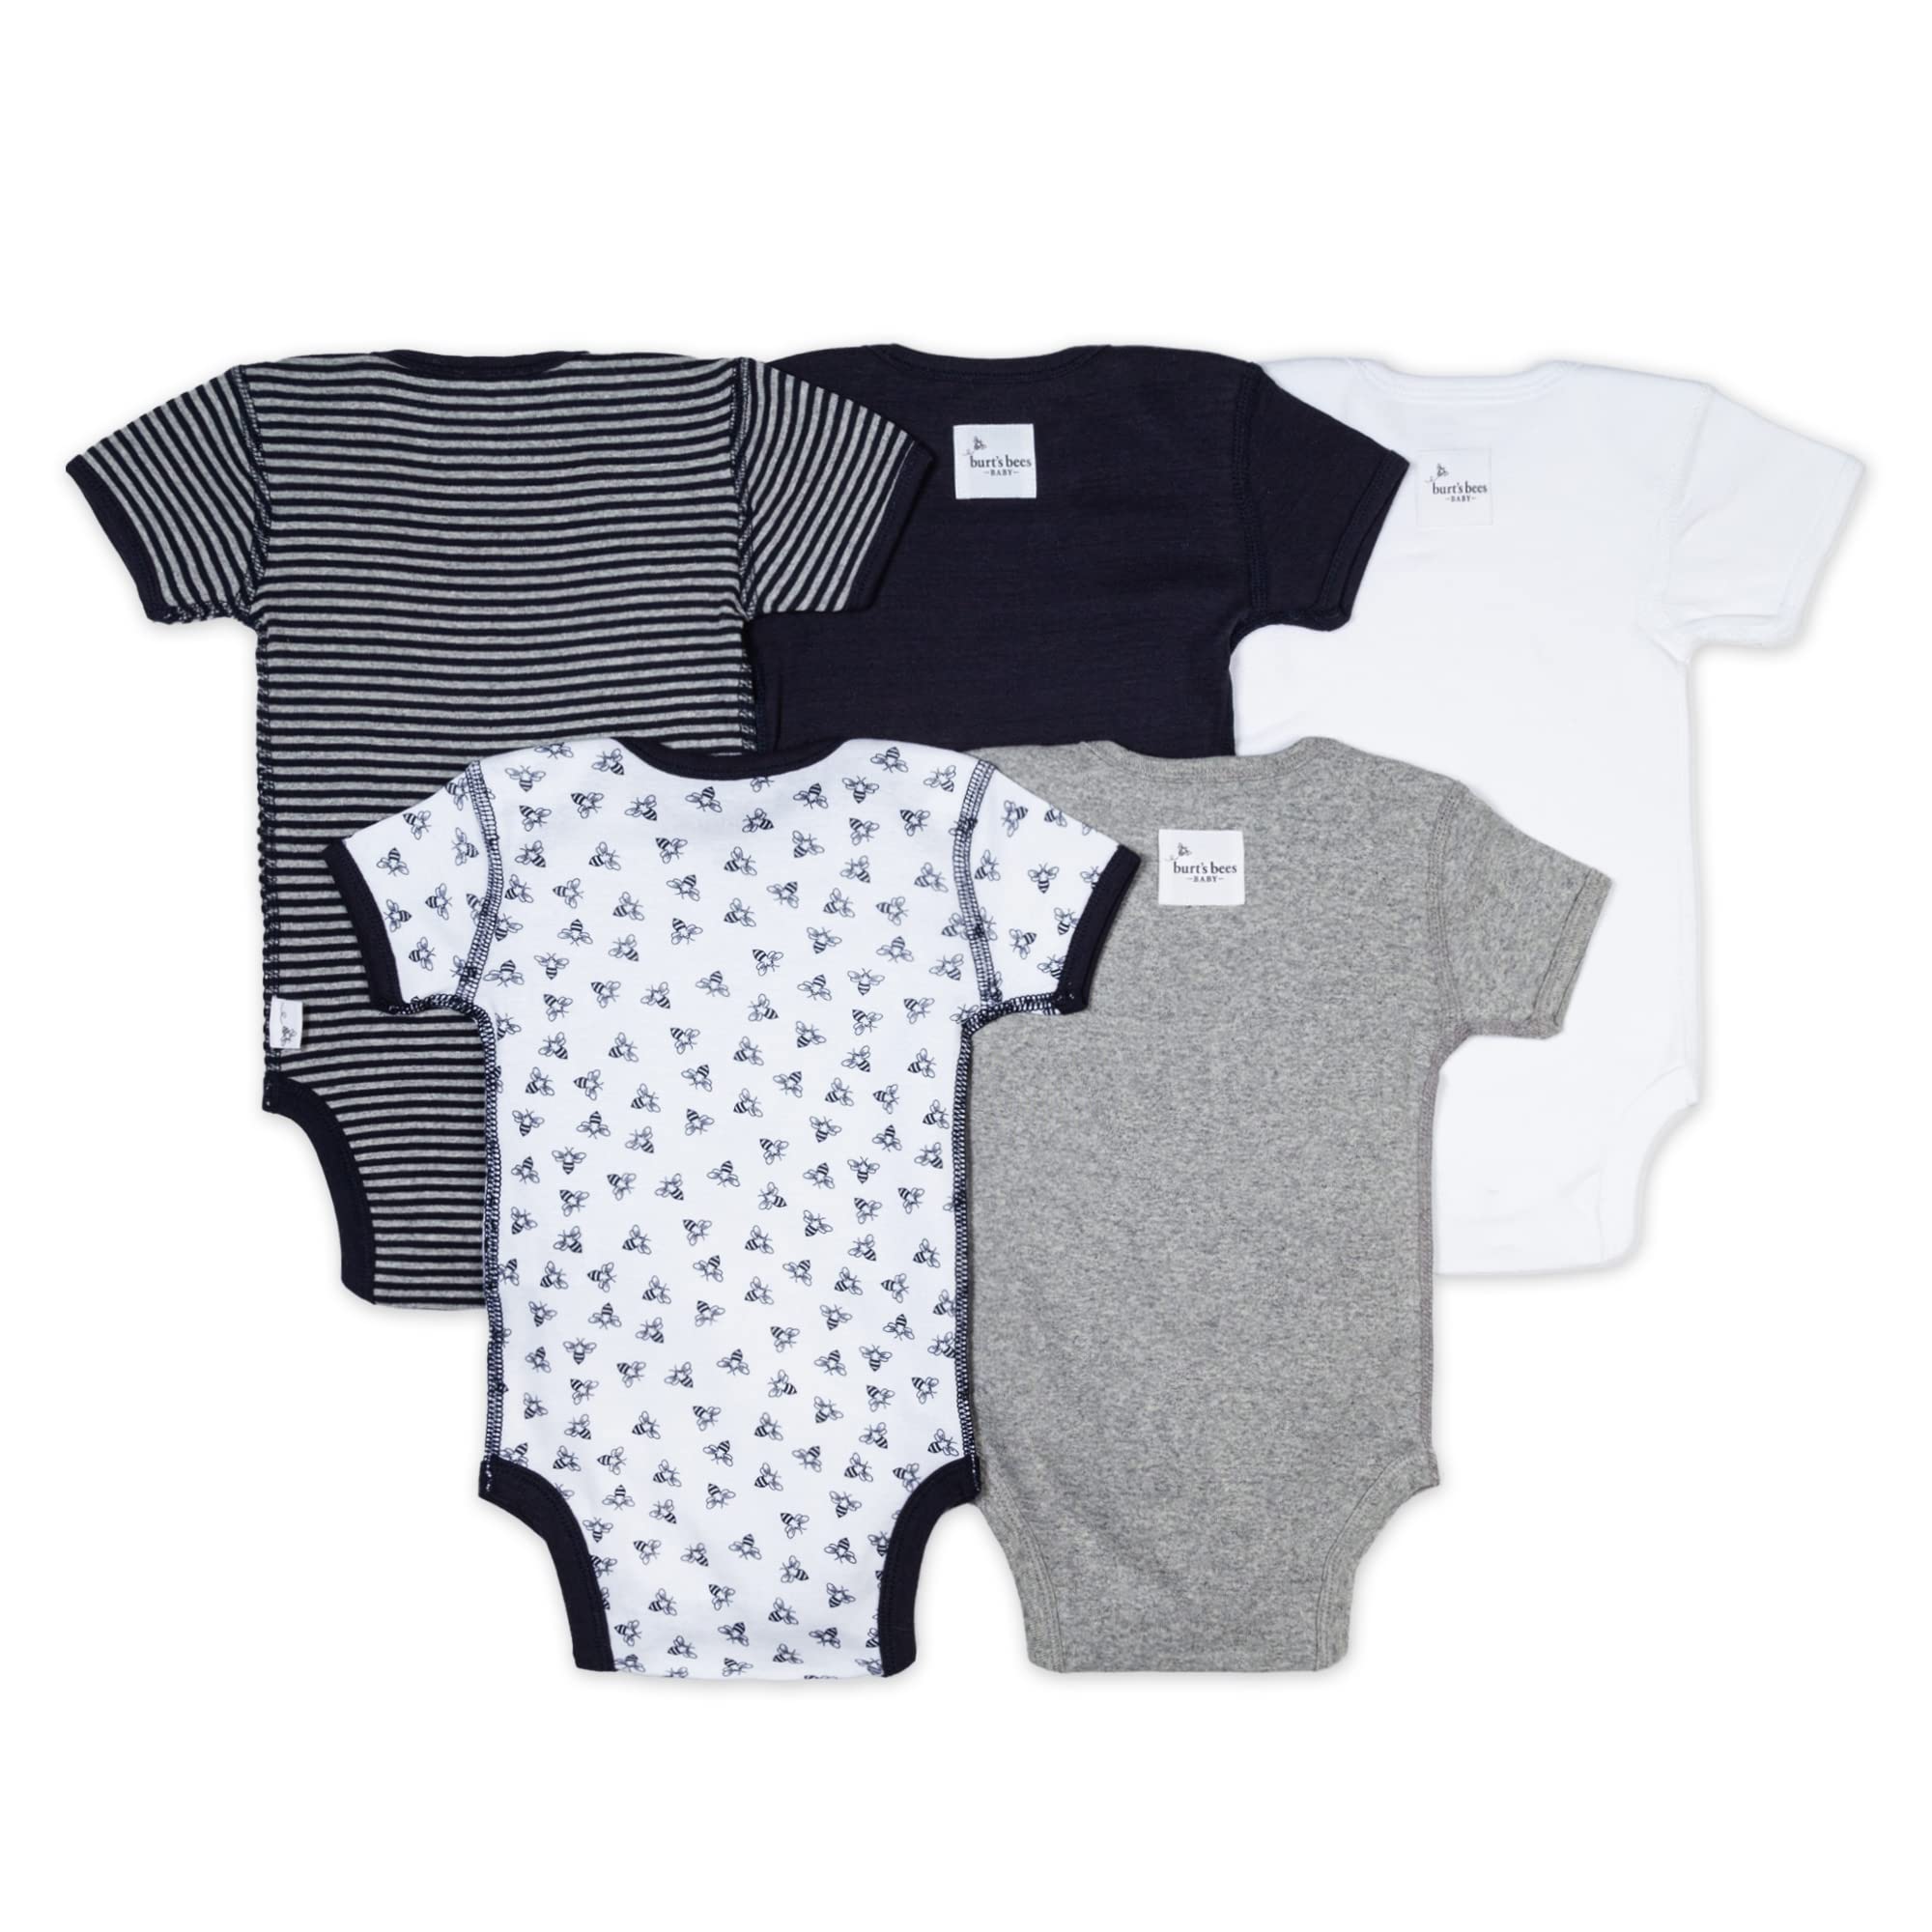 Burt's Bees Baby baby-boys Bodysuits, 5-pack Short & Long Sleeve One-pieces, 100% Organic Cotton